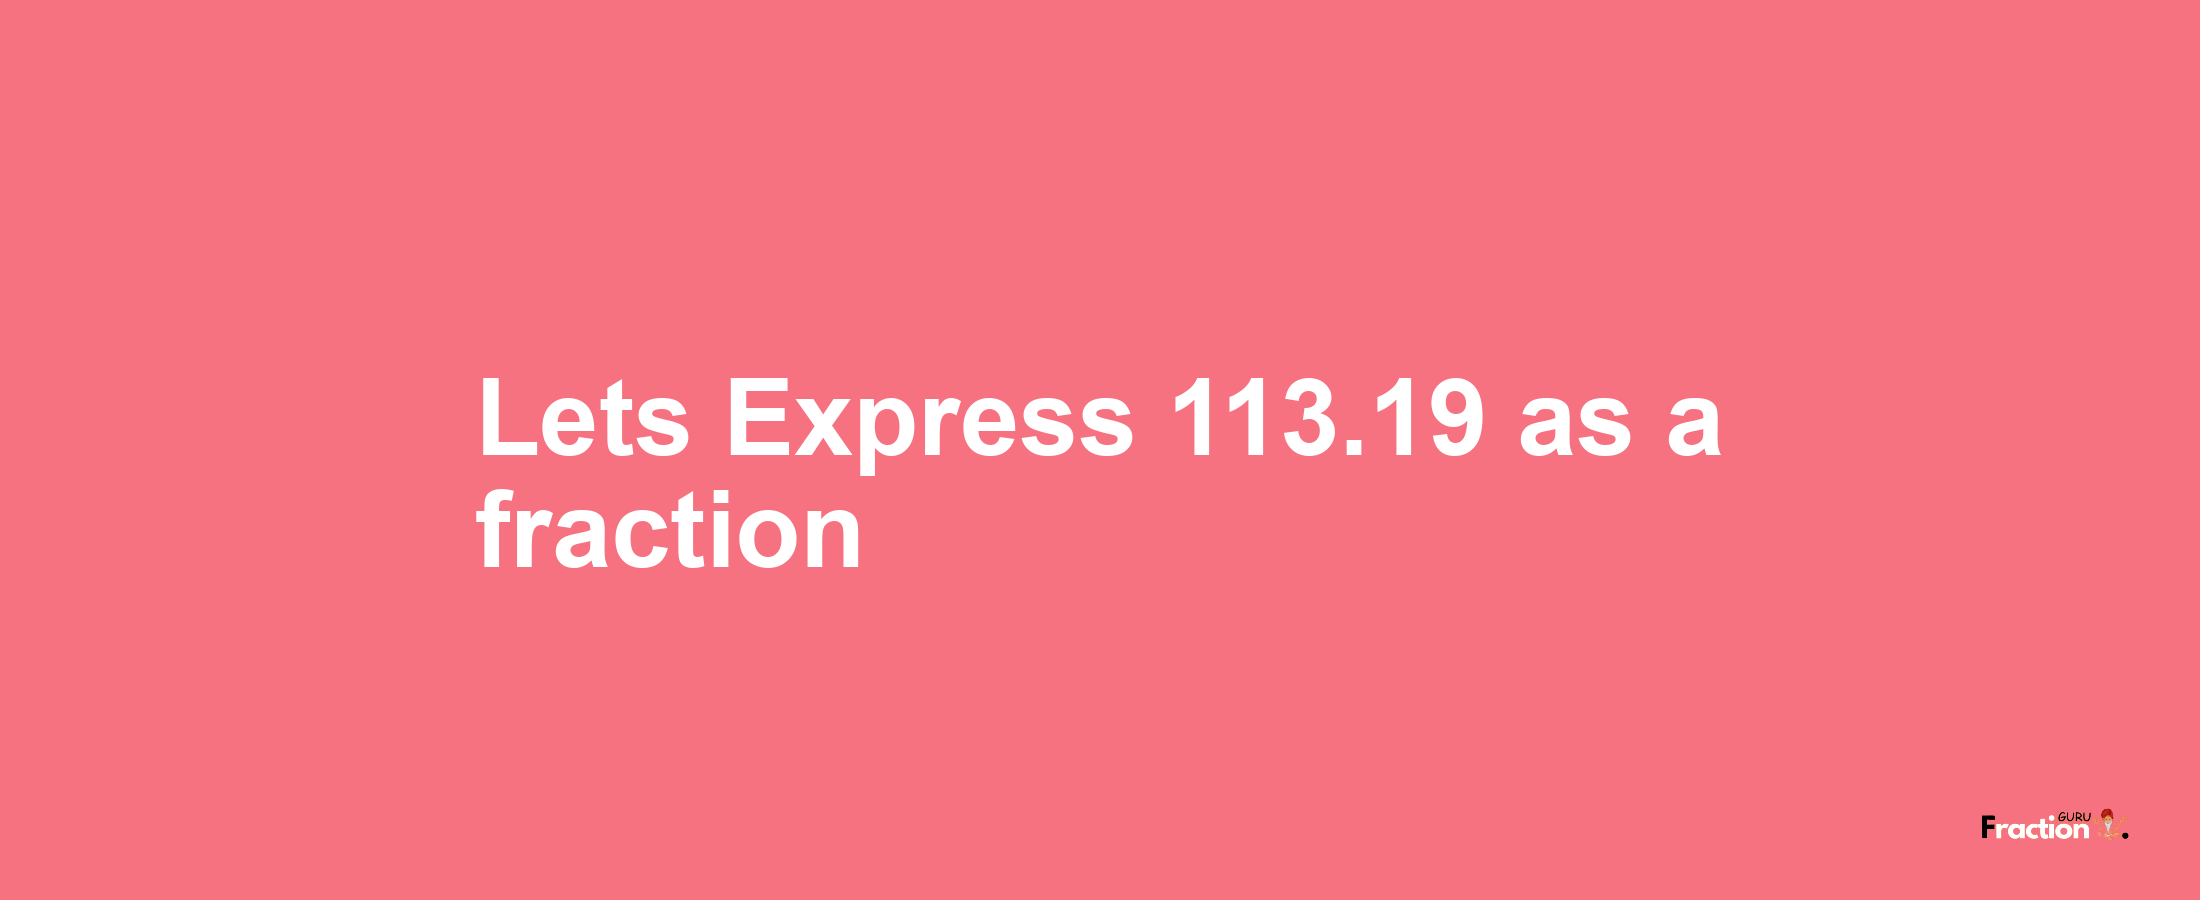 Lets Express 113.19 as afraction